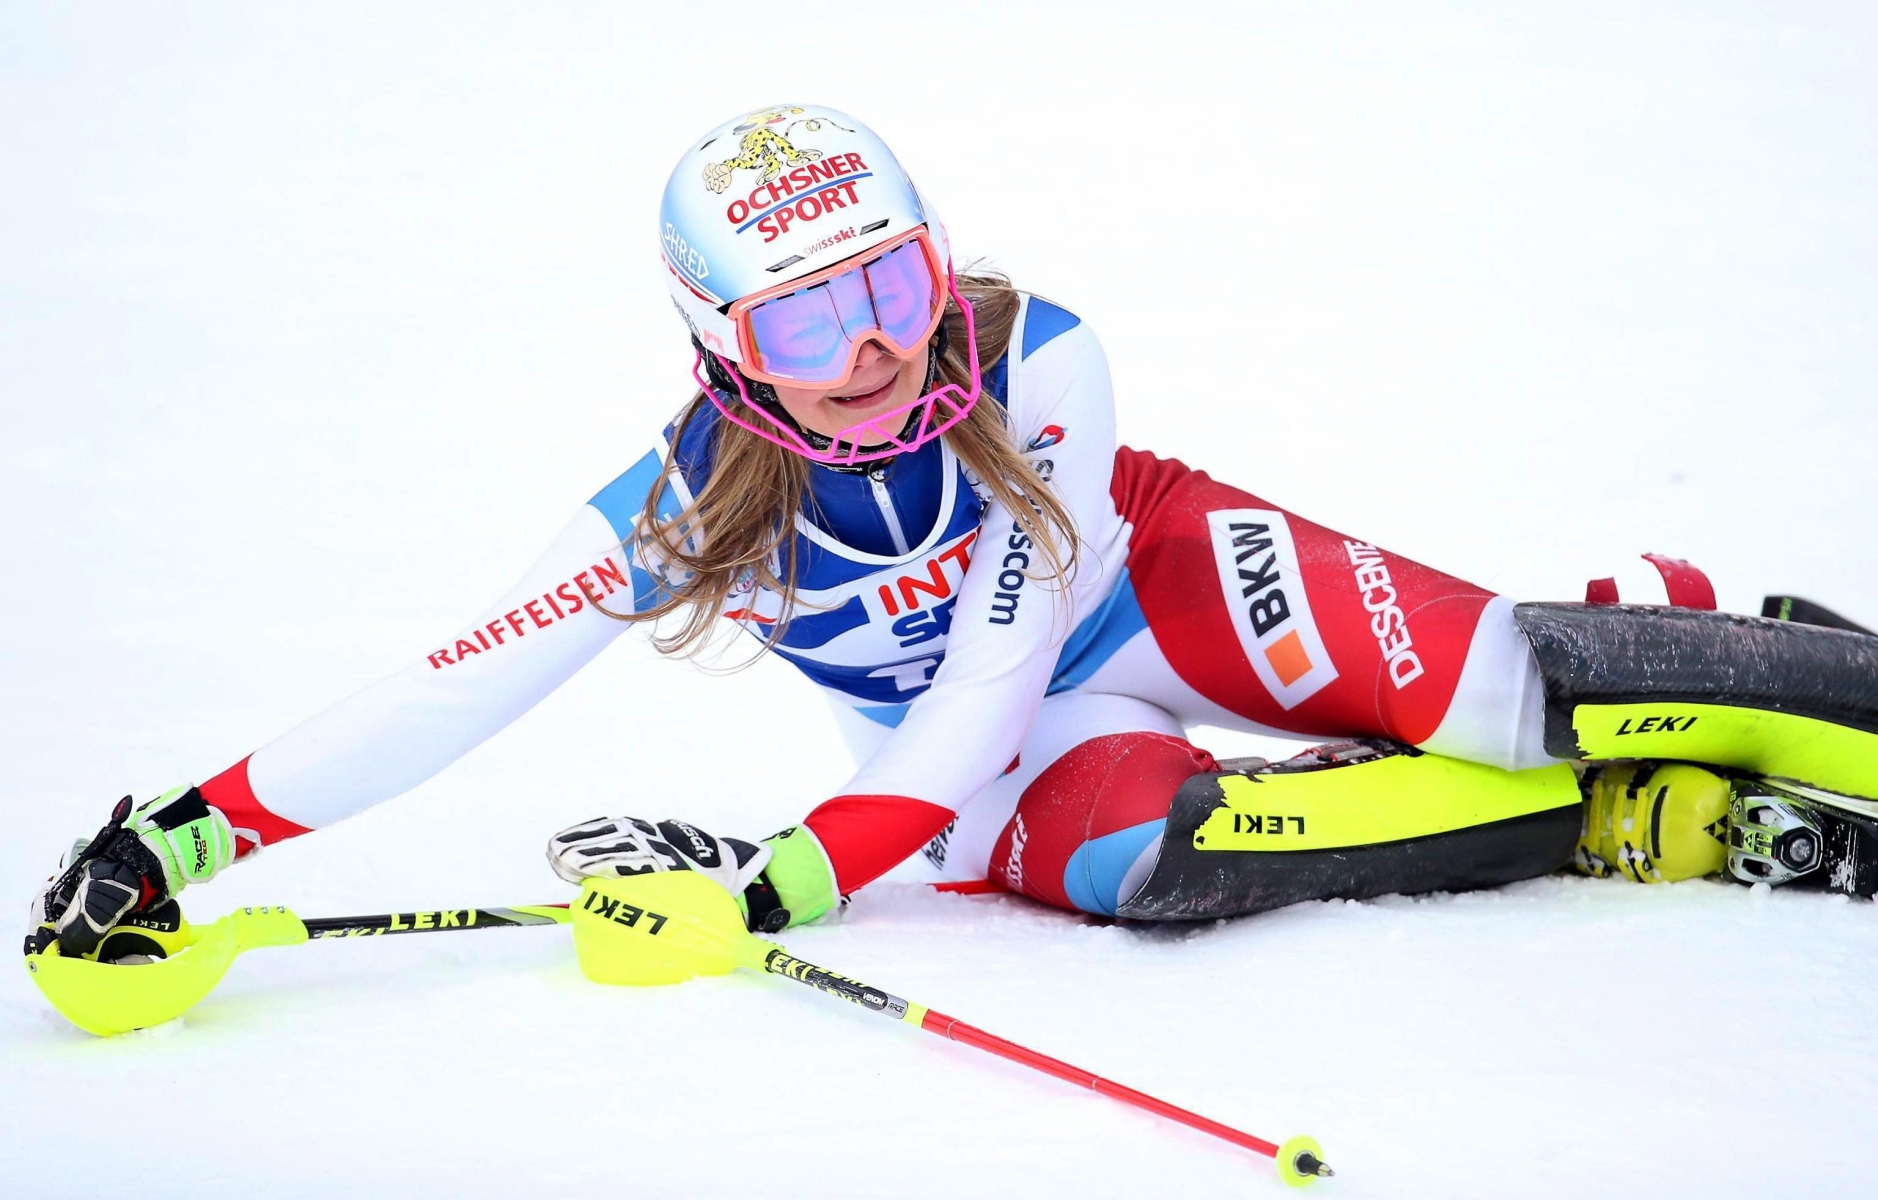 epa05088579 Charlotte Chable of Switzerland reacts in the finish area during the second run of the women's Slalom race of the FIS Alpine Skiing World Cup in Santa Caterina, Italy, 05 January 2016.  EPA/MATTEO BAZZI ITALY ALPINE SKIING WORLD CUP